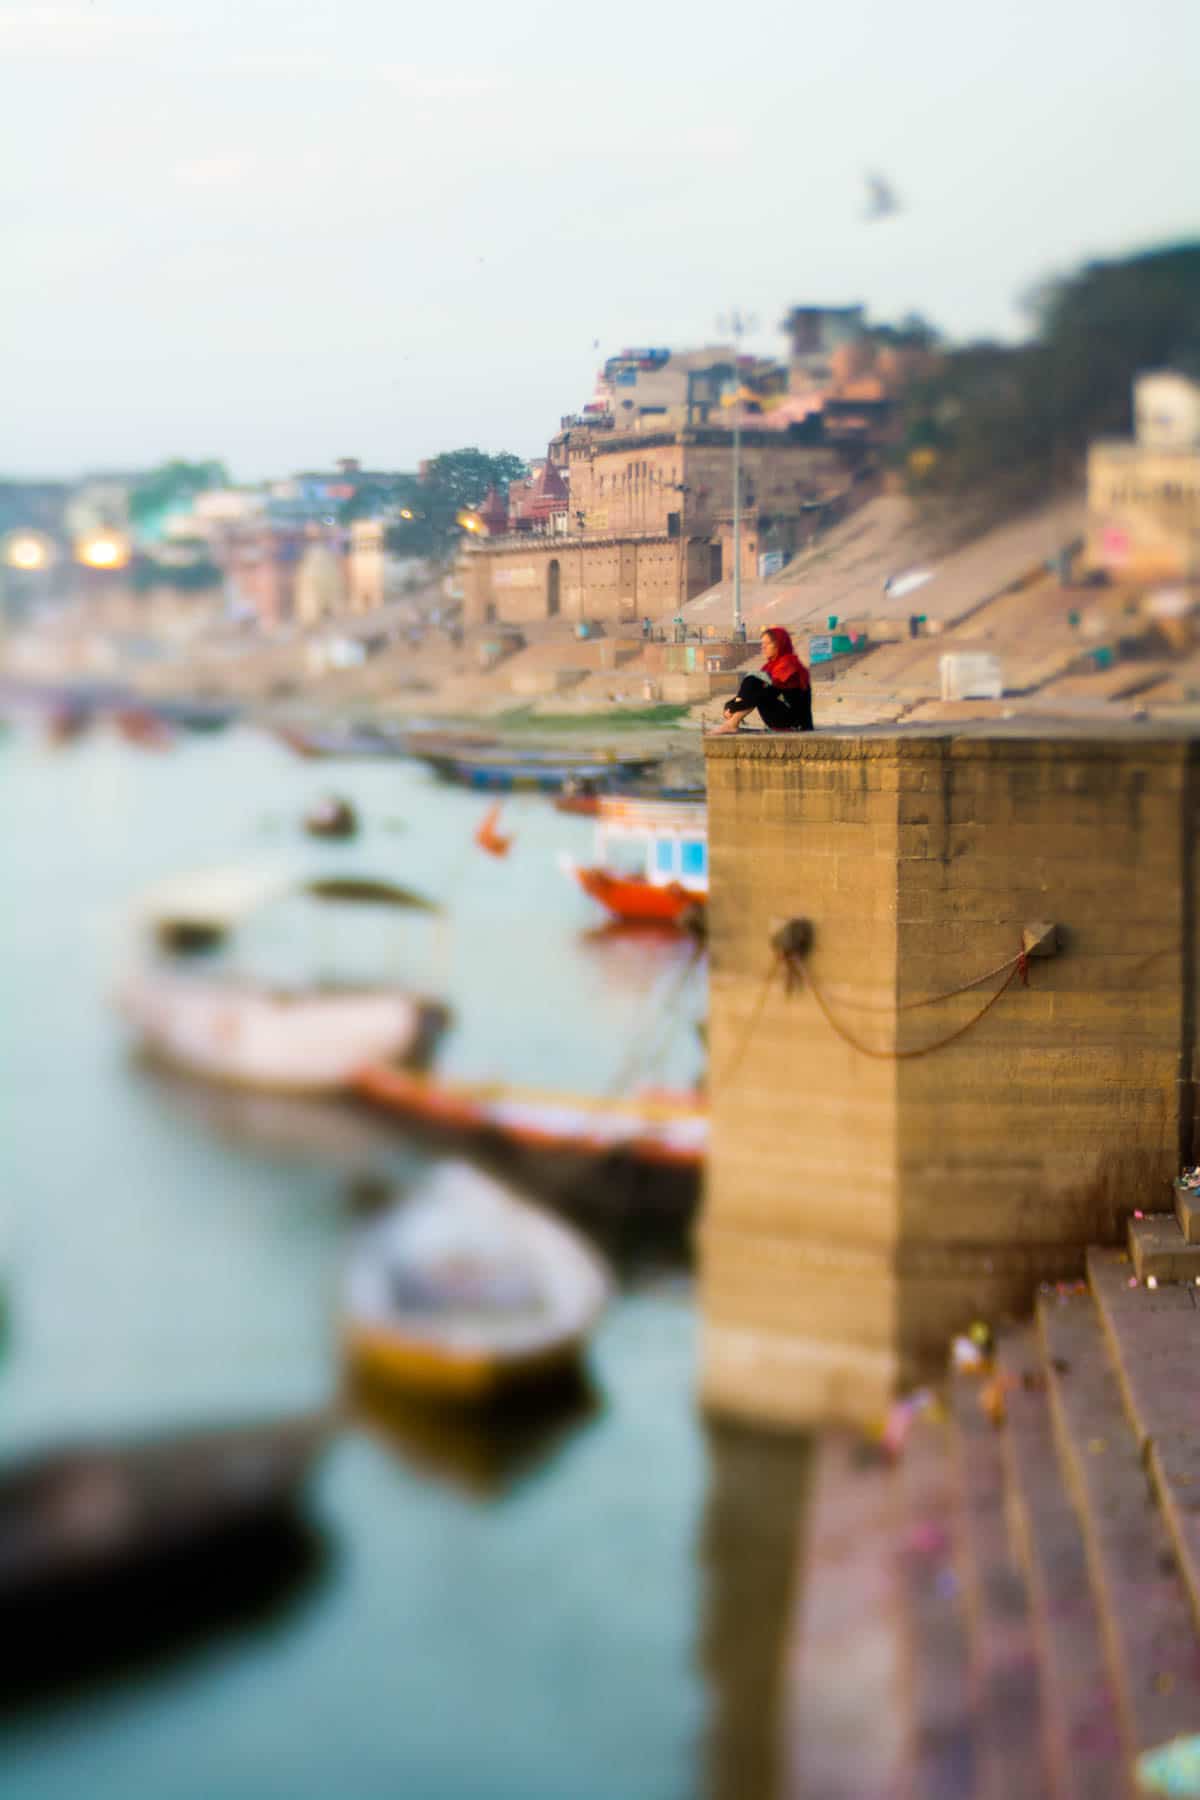 A tourist meditating on the ghats of Varanasi, India, shot with a Lensbaby Edge 50 optic.